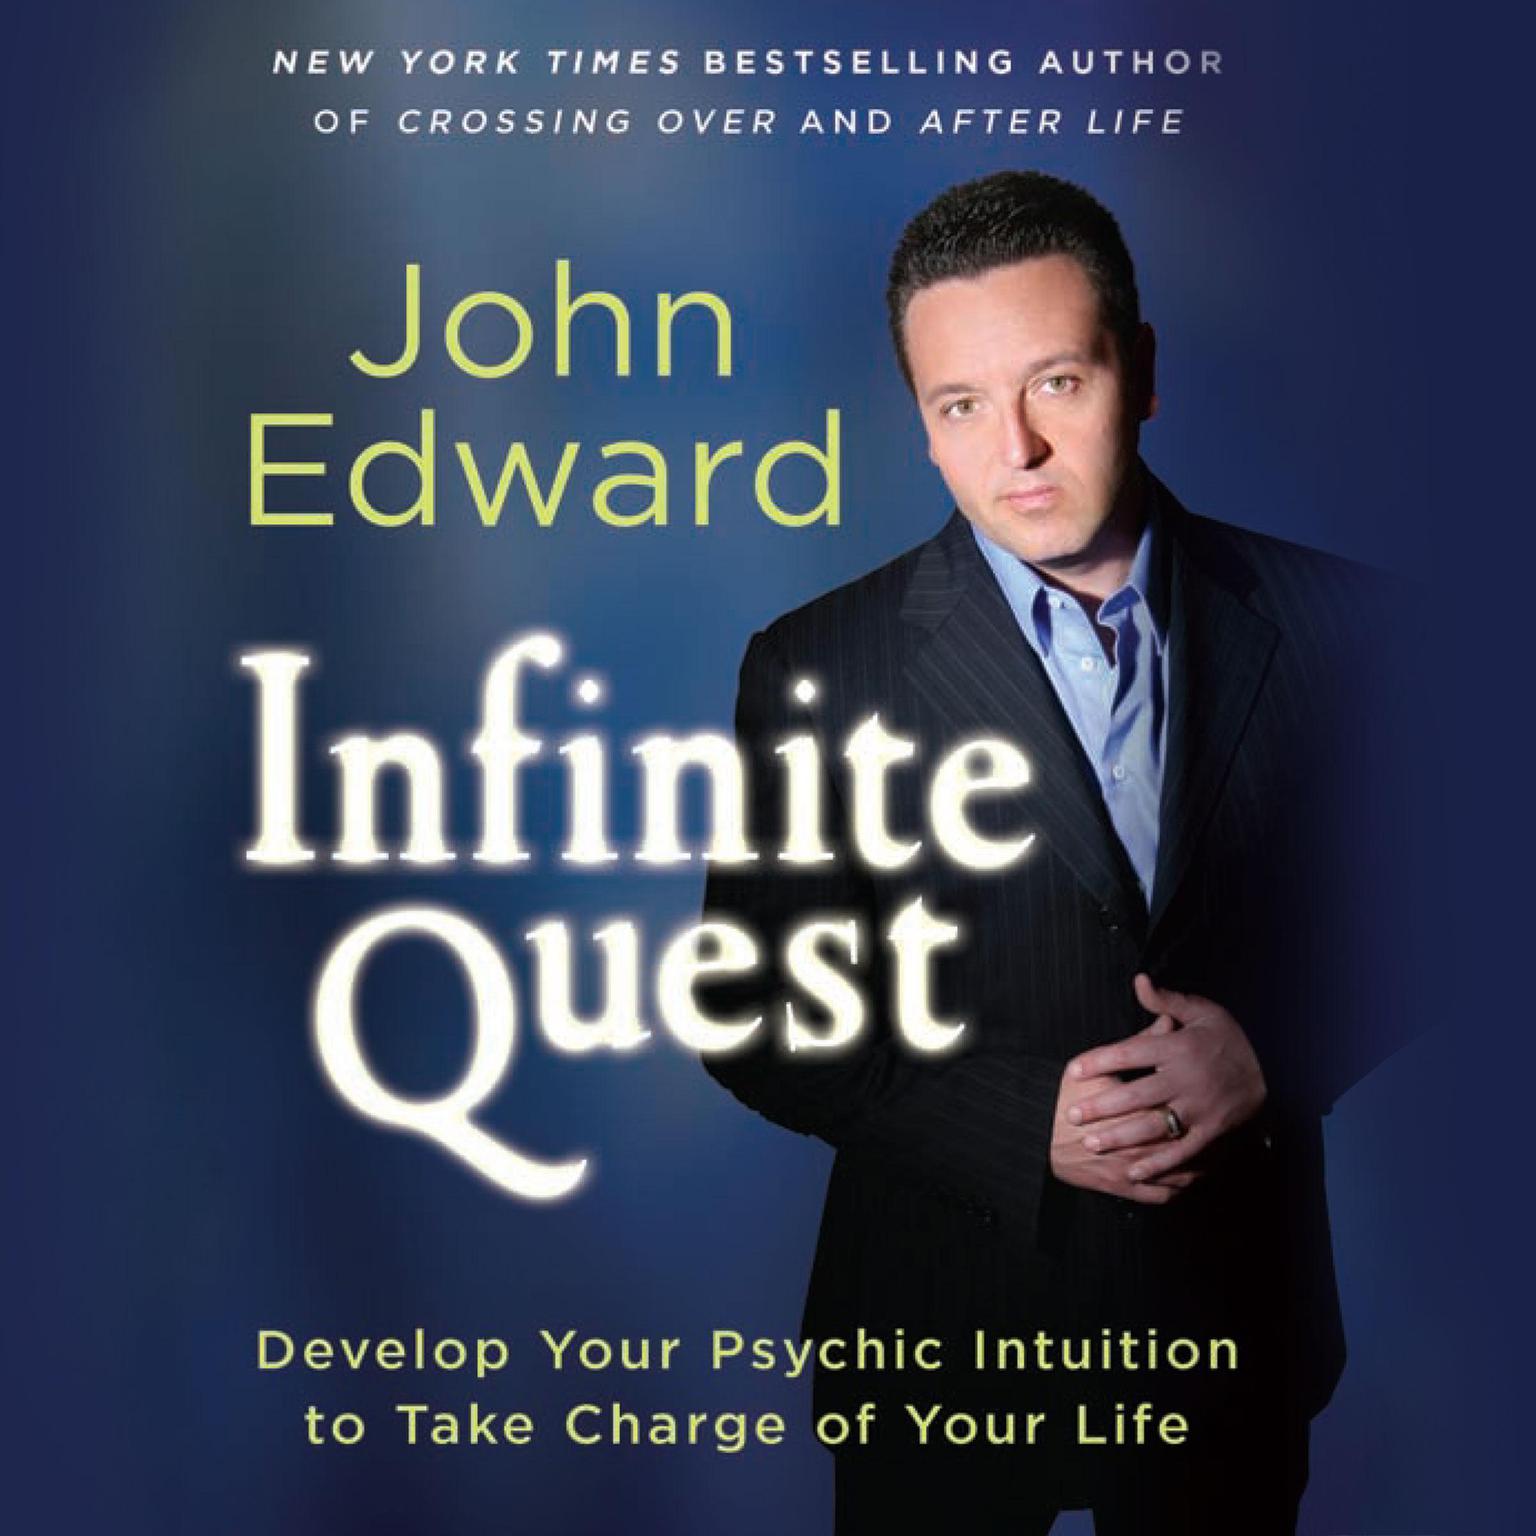 Infinite Quest: Develop Your Psychic Intuition to Take Charge of Your Life Audiobook, by John Edward